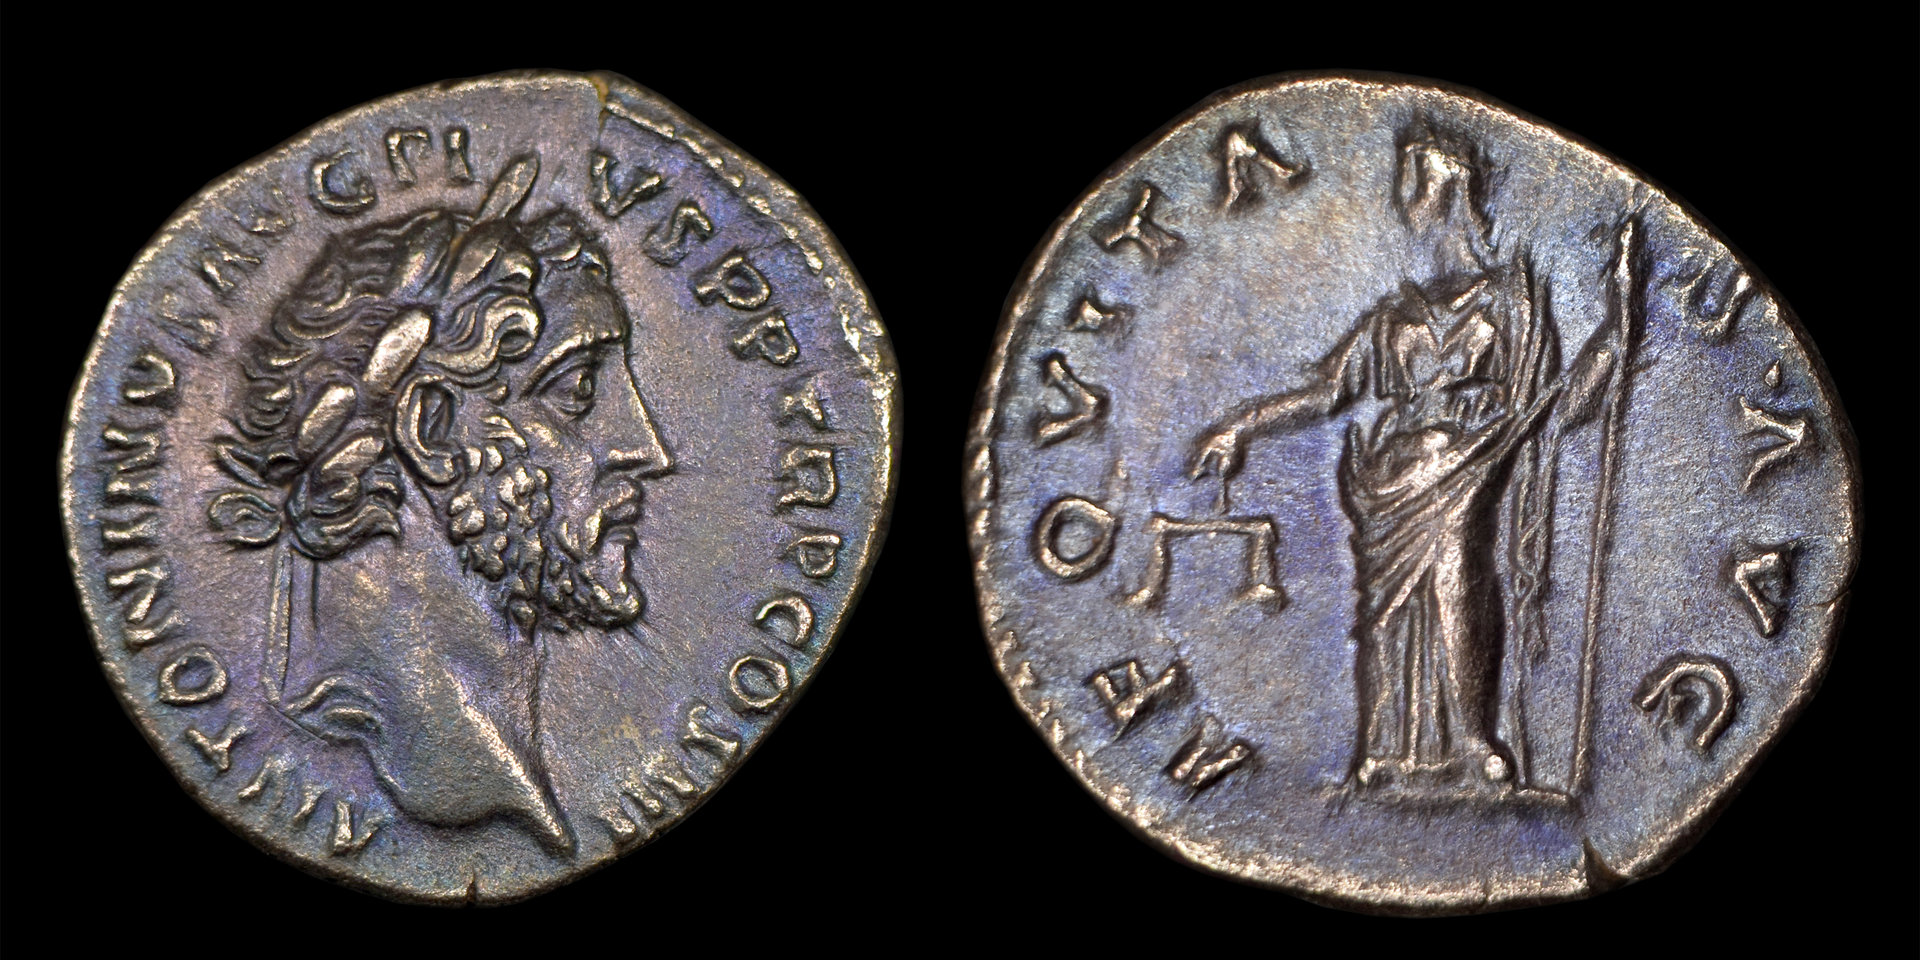 What are the most interesting coins of Antoninus Pius? | Page 2 | Coin Talk